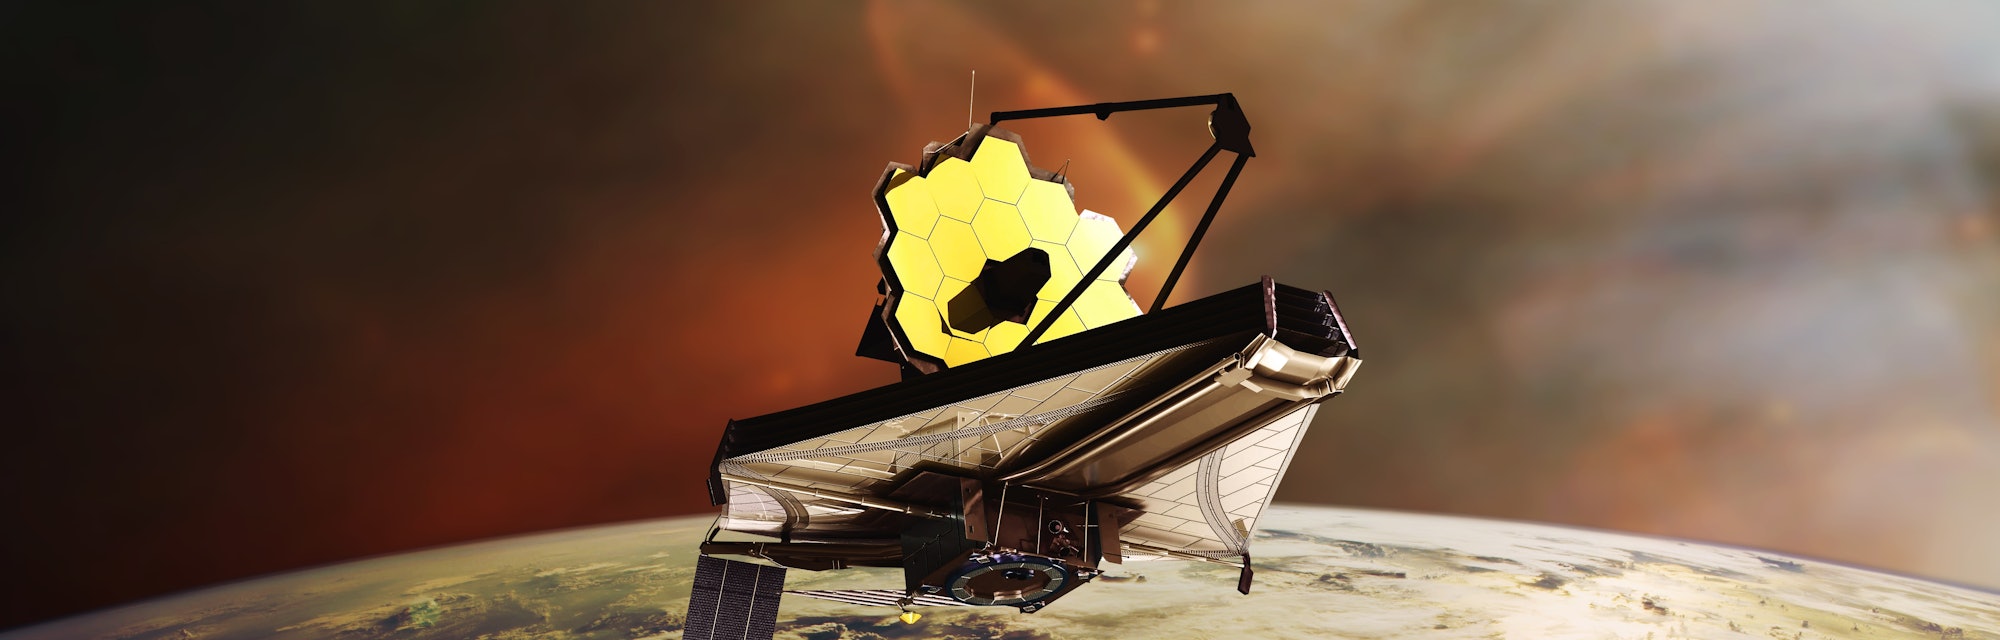 The James Webb telescope on low-orbit of Earth planet. JWST launch art. Elements of this image furni...